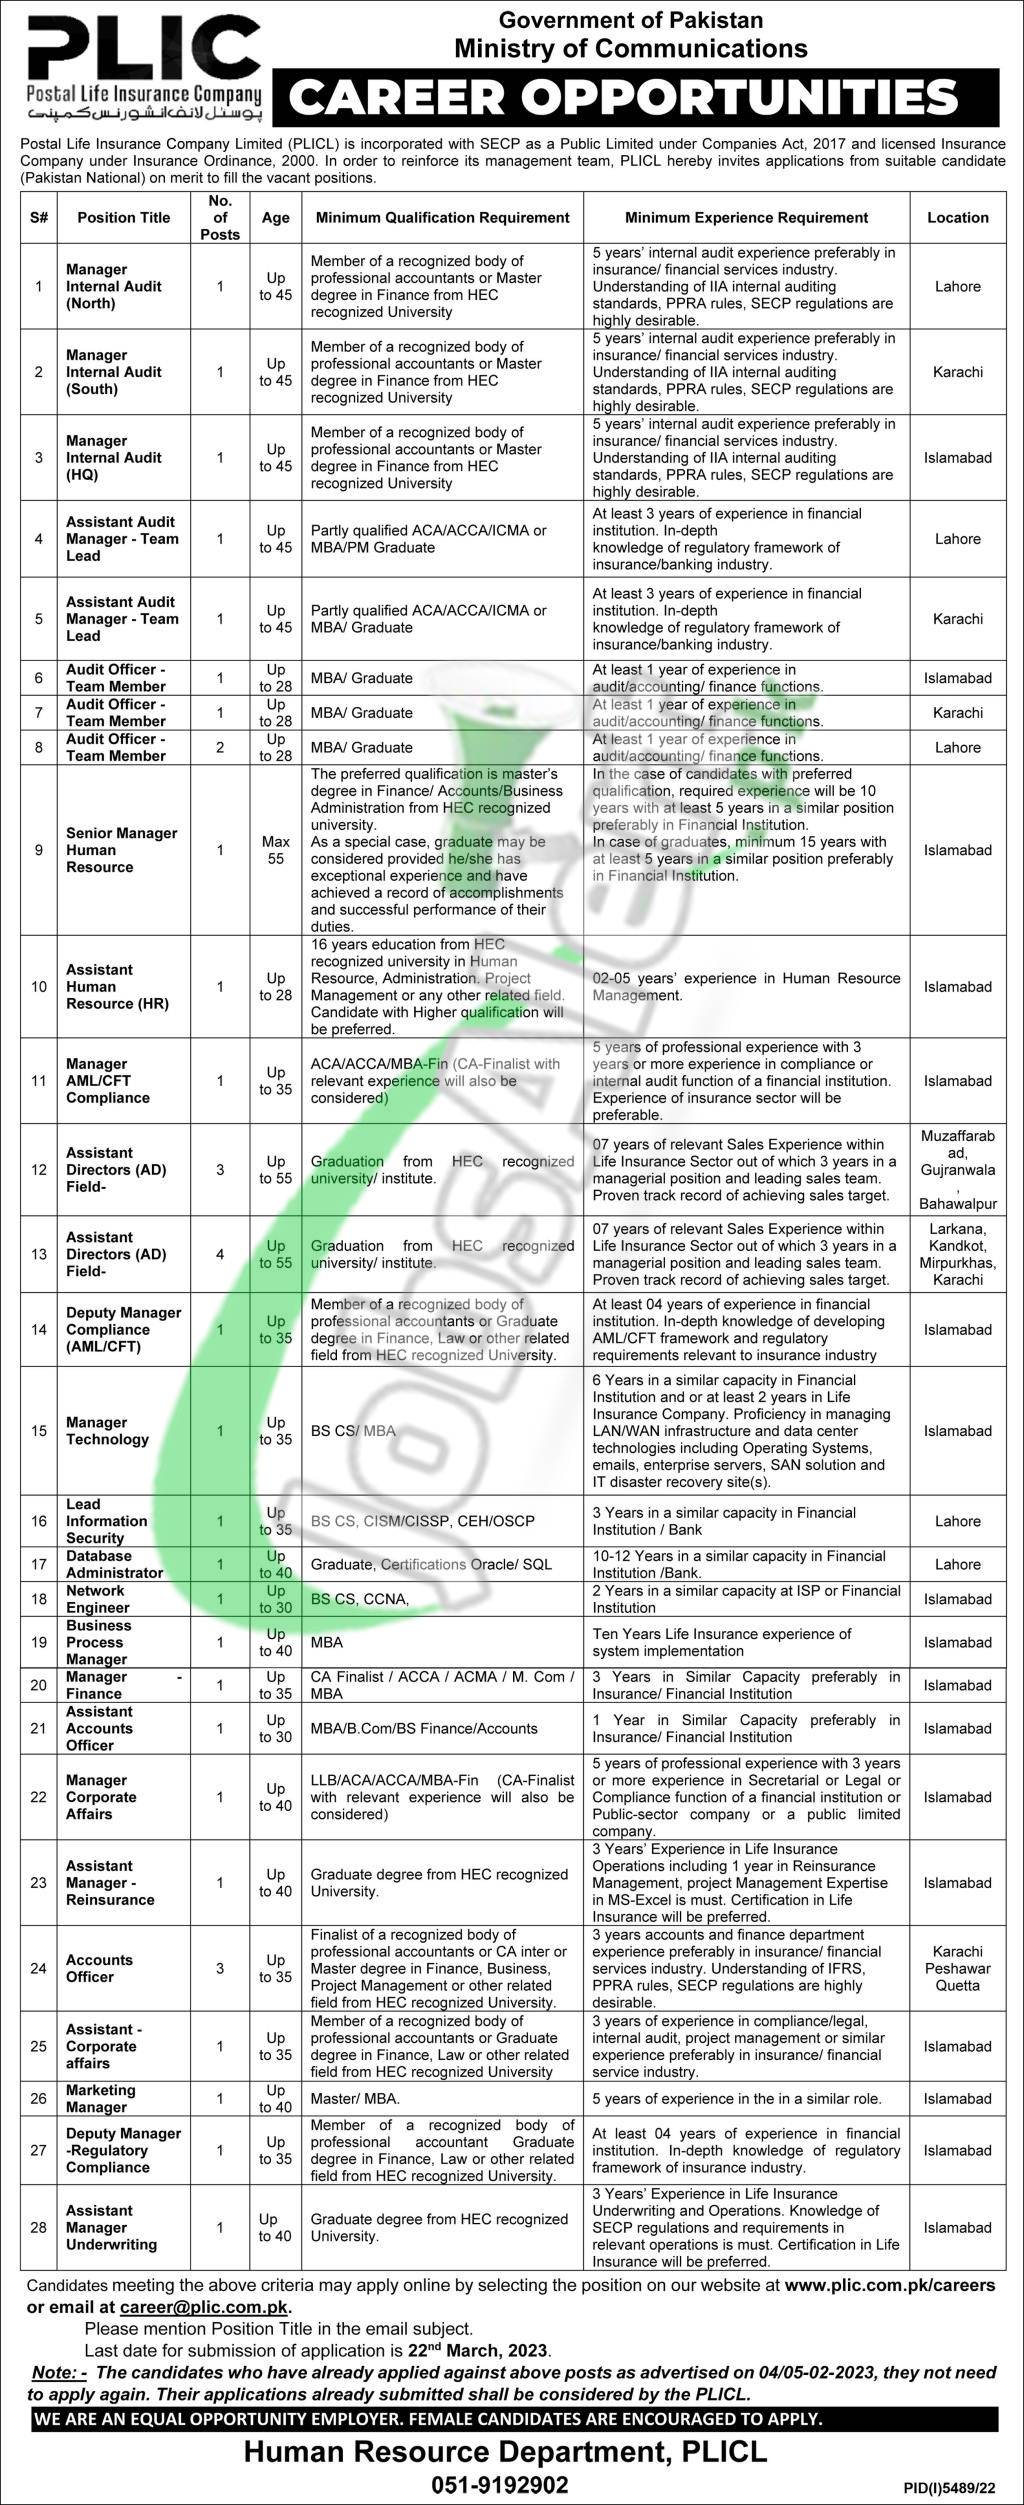 Ministry of Communication Jobs